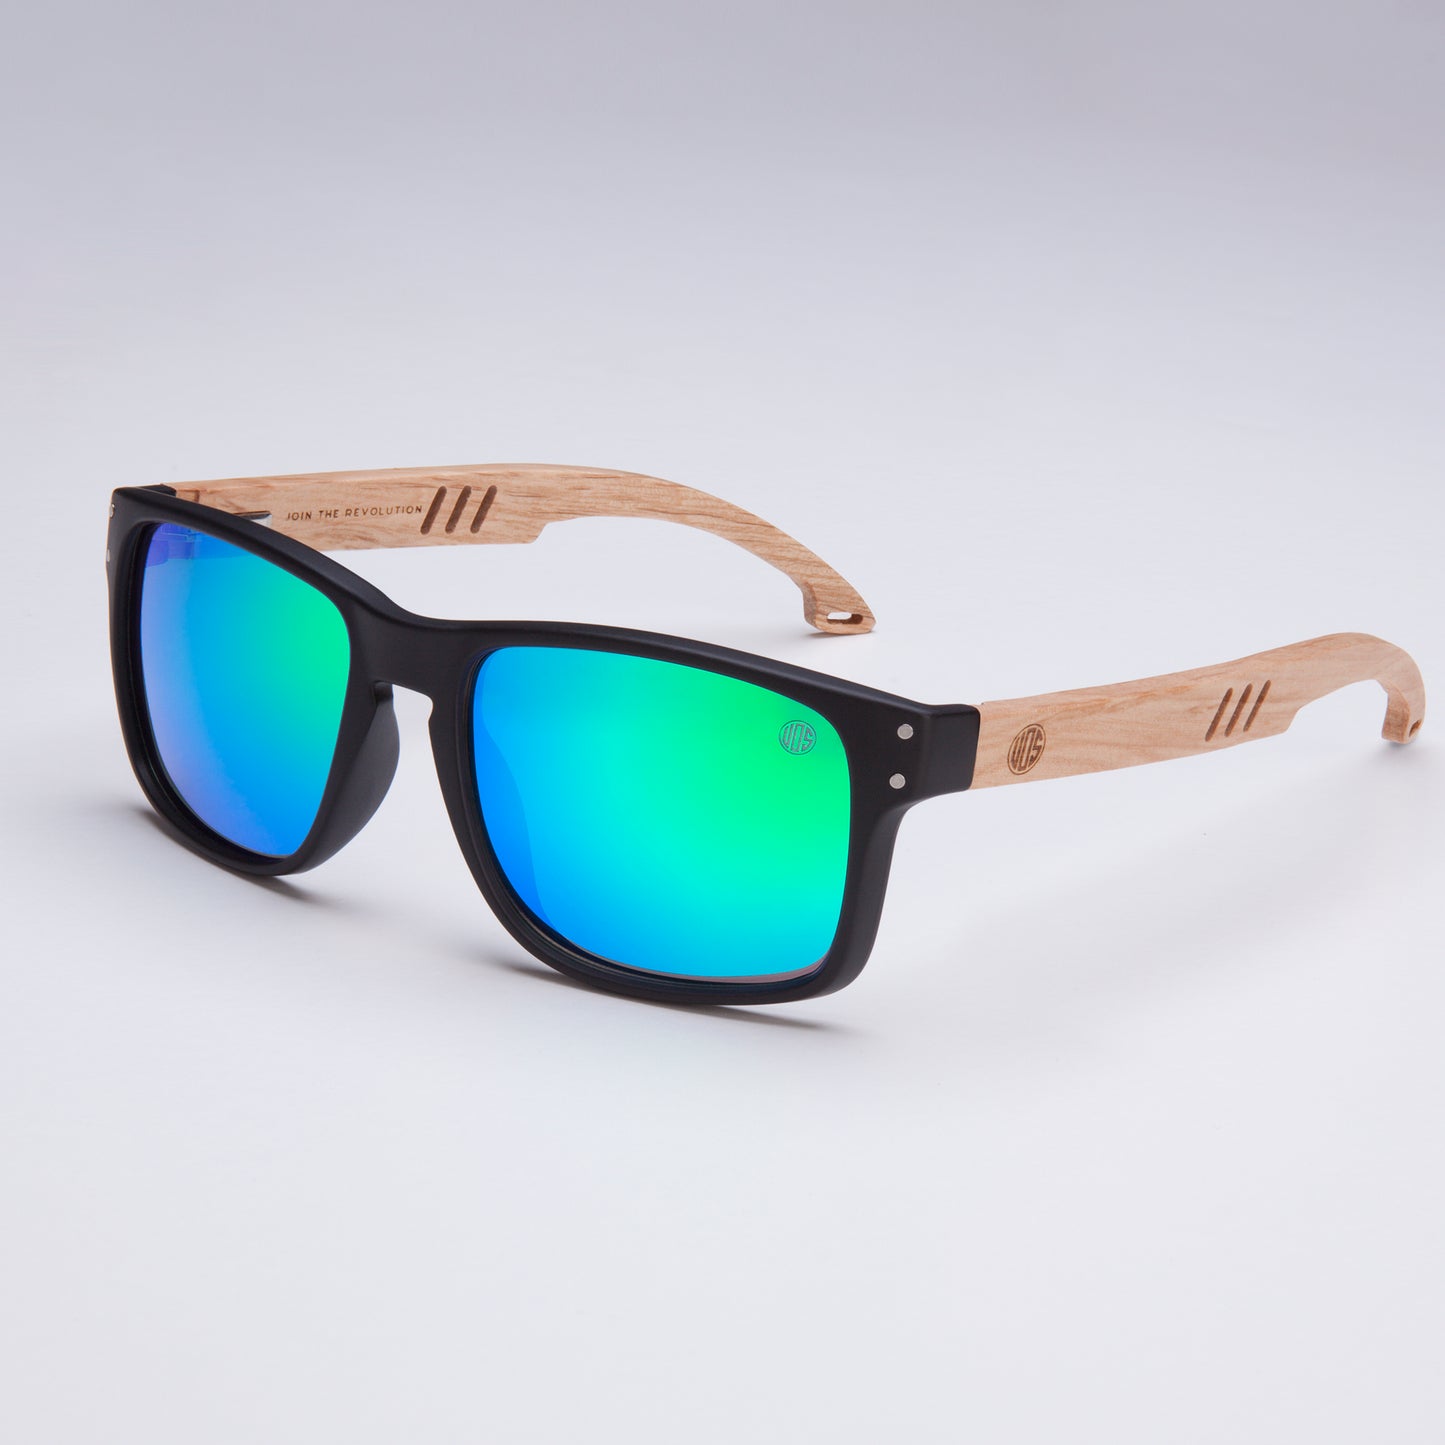 Eco Friendly Sunglasses with polarised lens.